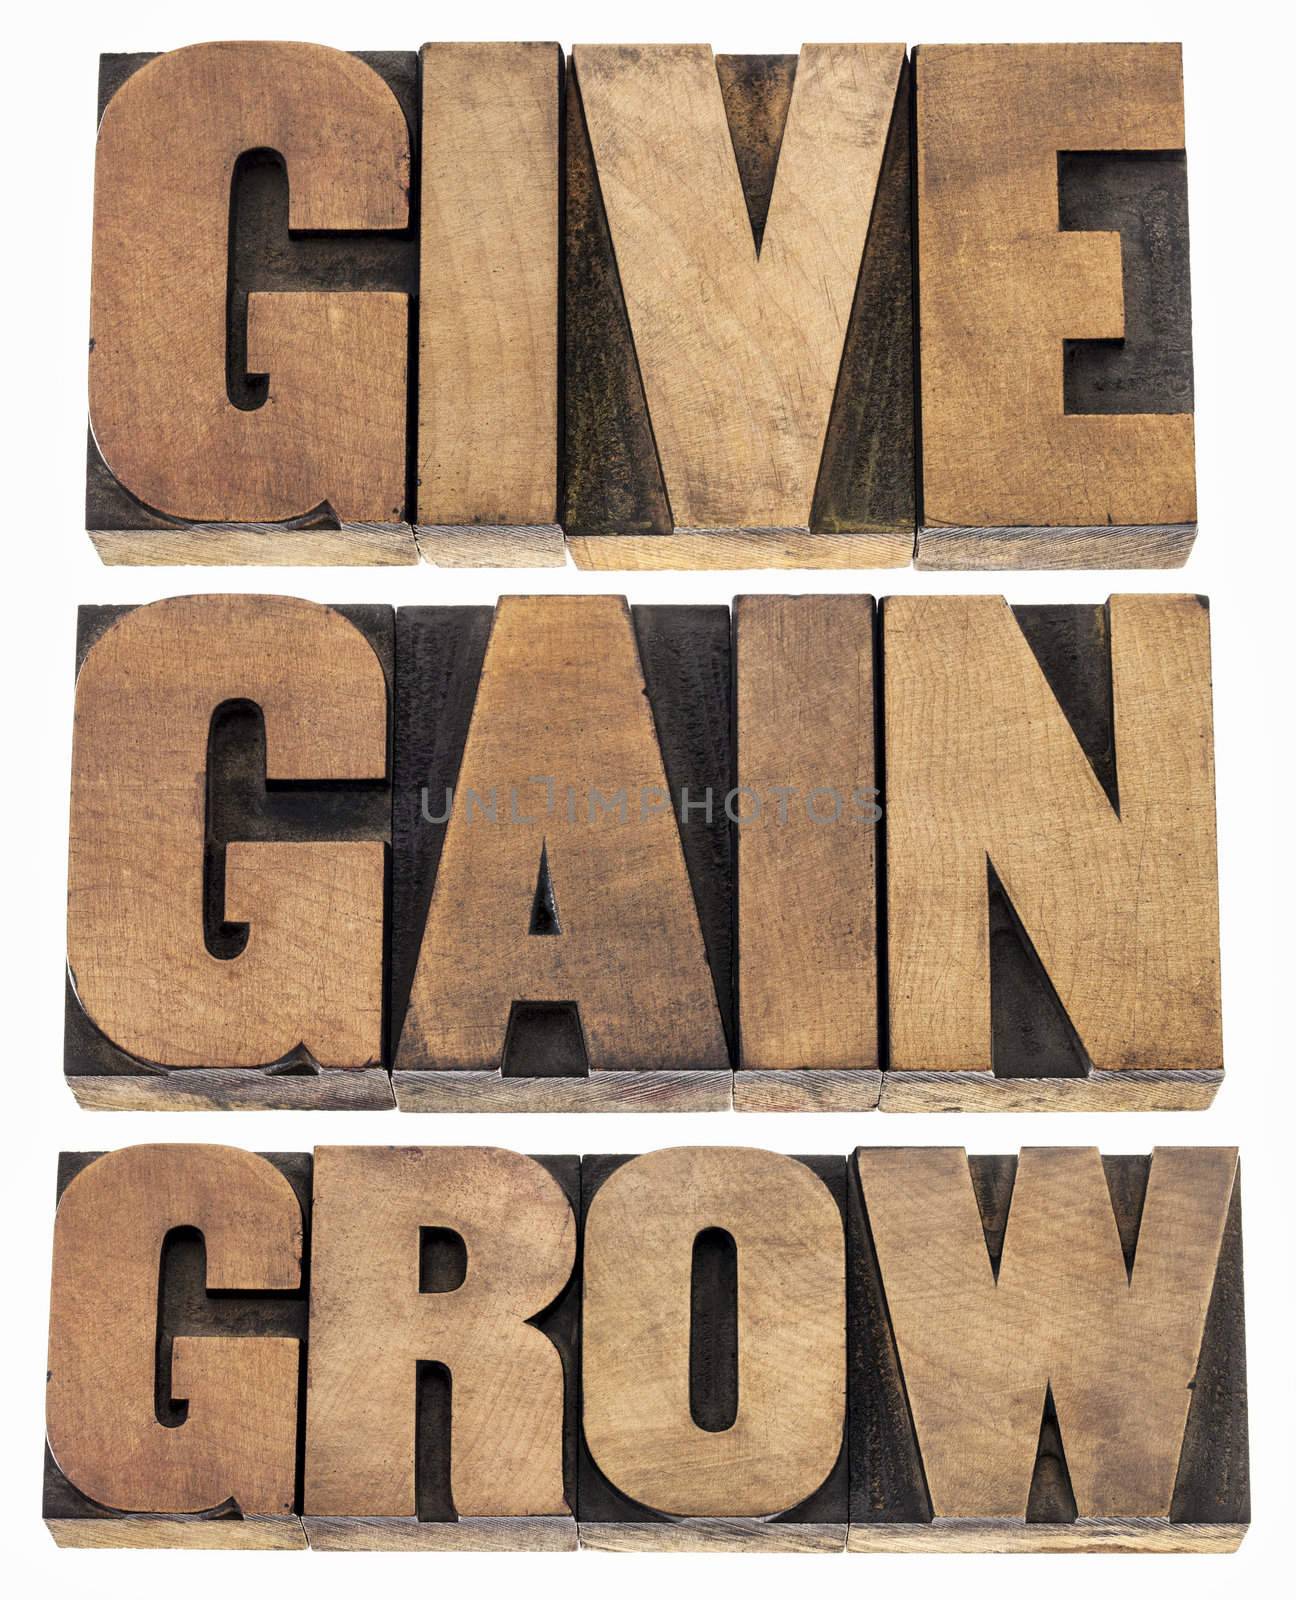 give, gain and grow by PixelsAway